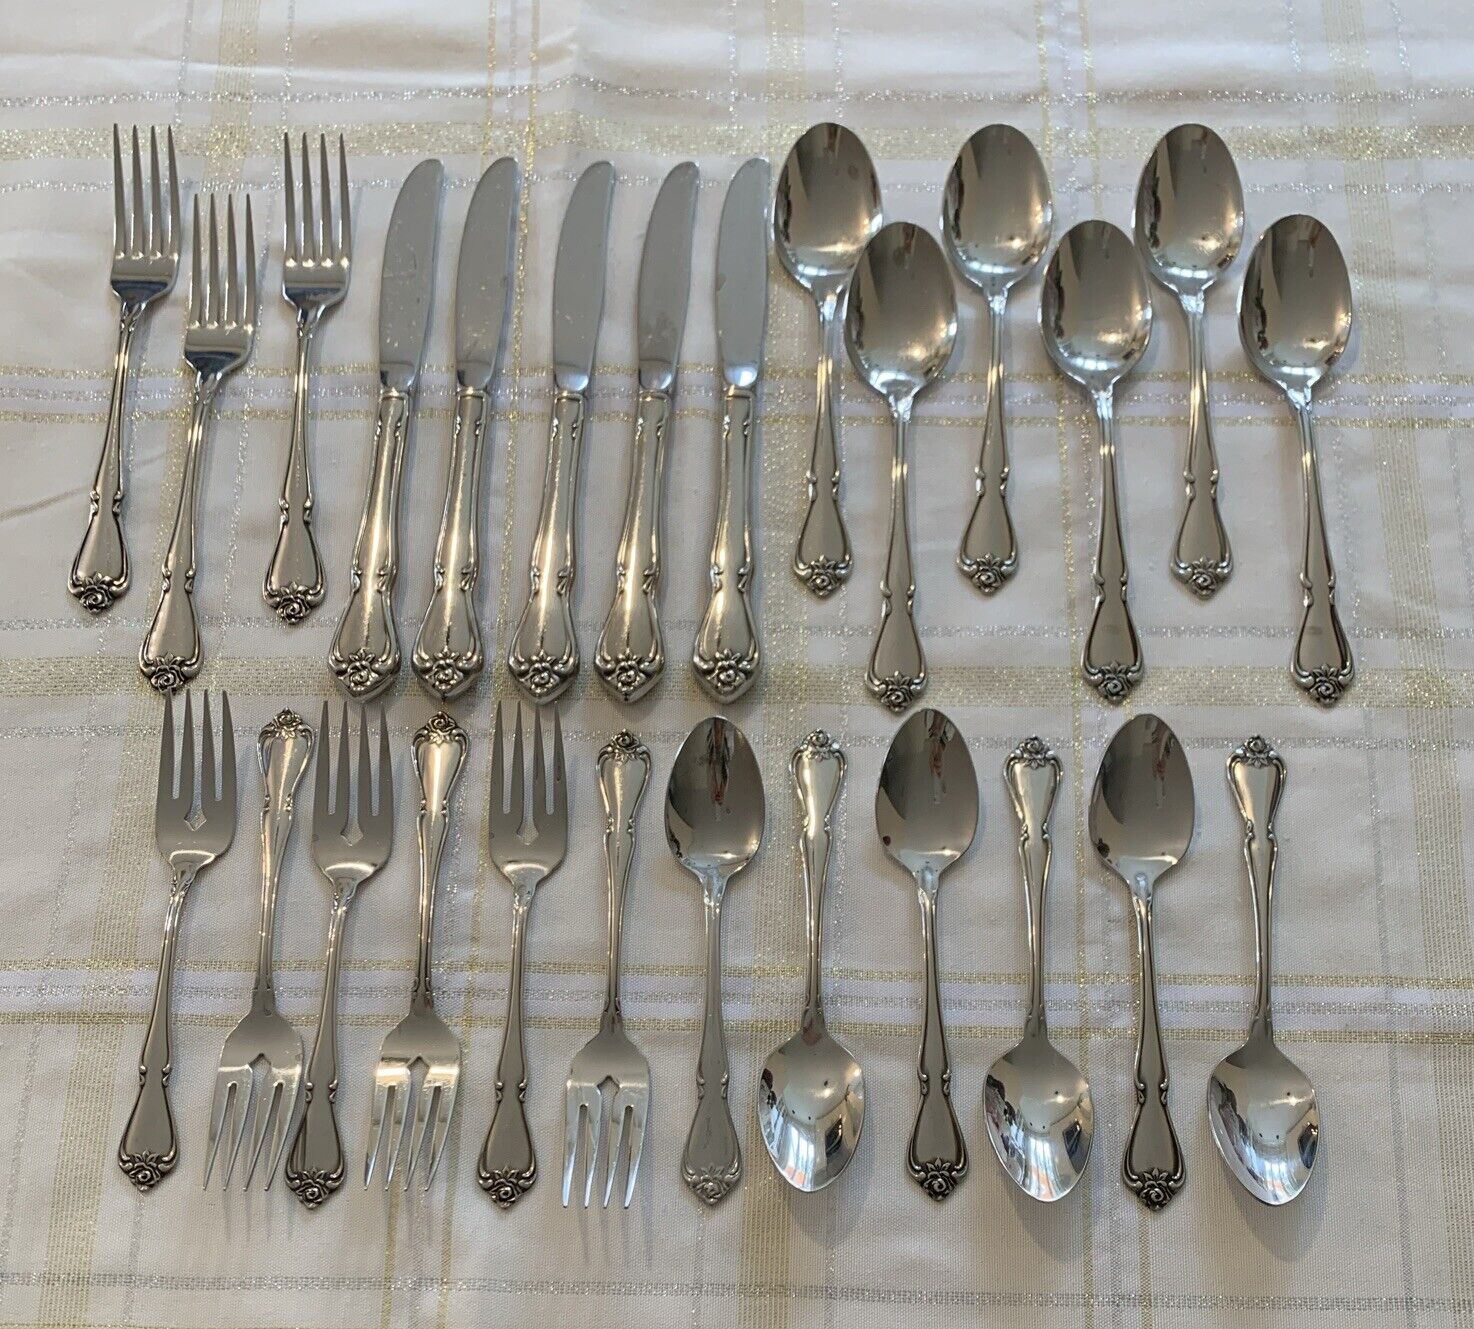 Arbor Rose – True Rose Oneida Flatware Rogers OHSARR Stainless Glossy Floral